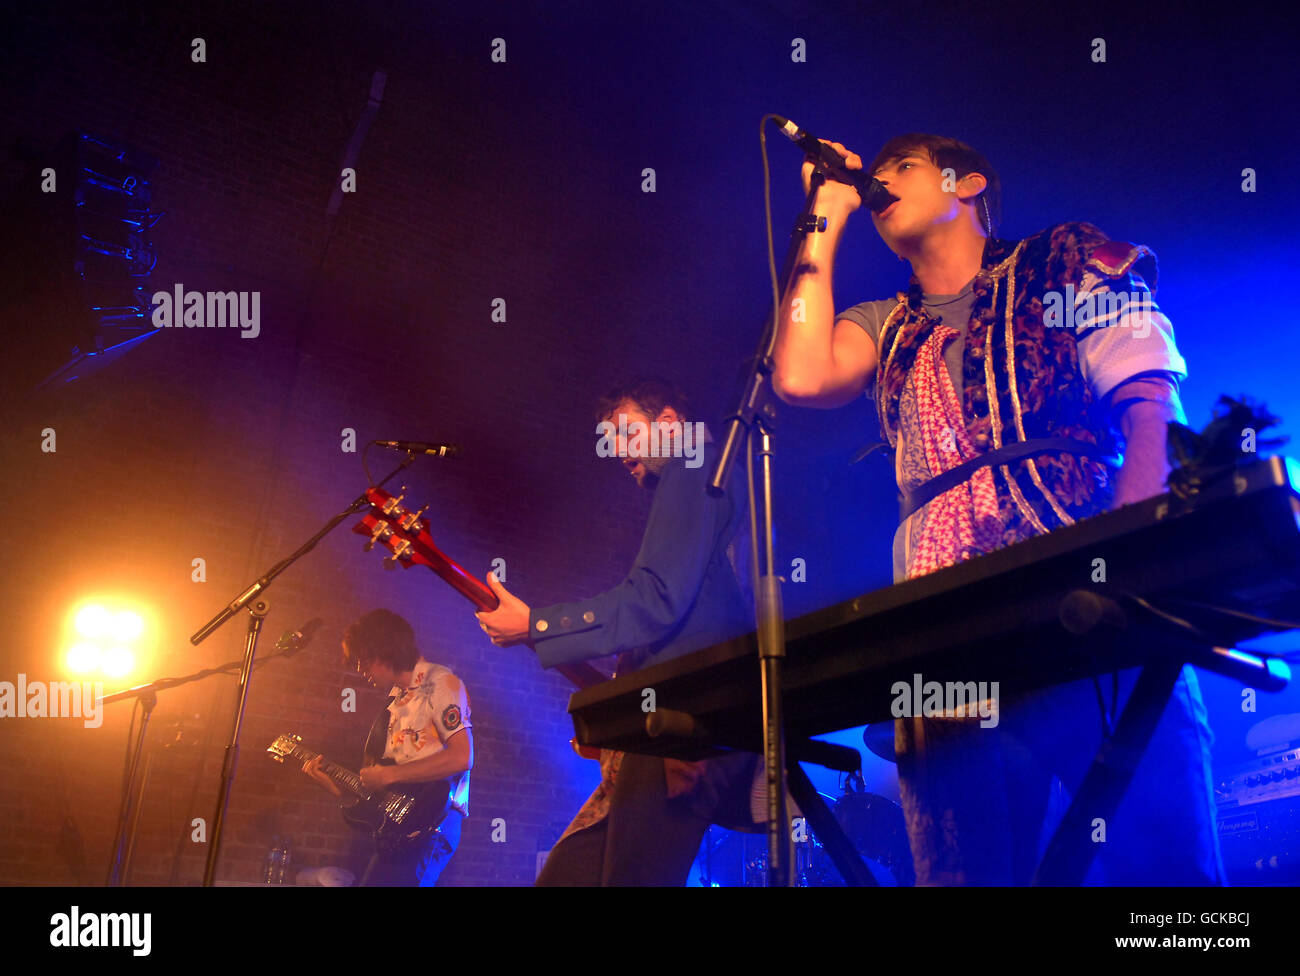 (From left to right) Anthony Rossomando, Jamie Reynolds and James Righton of the Klaxons perform on stage at the Village Underground in east London. Stock Photo